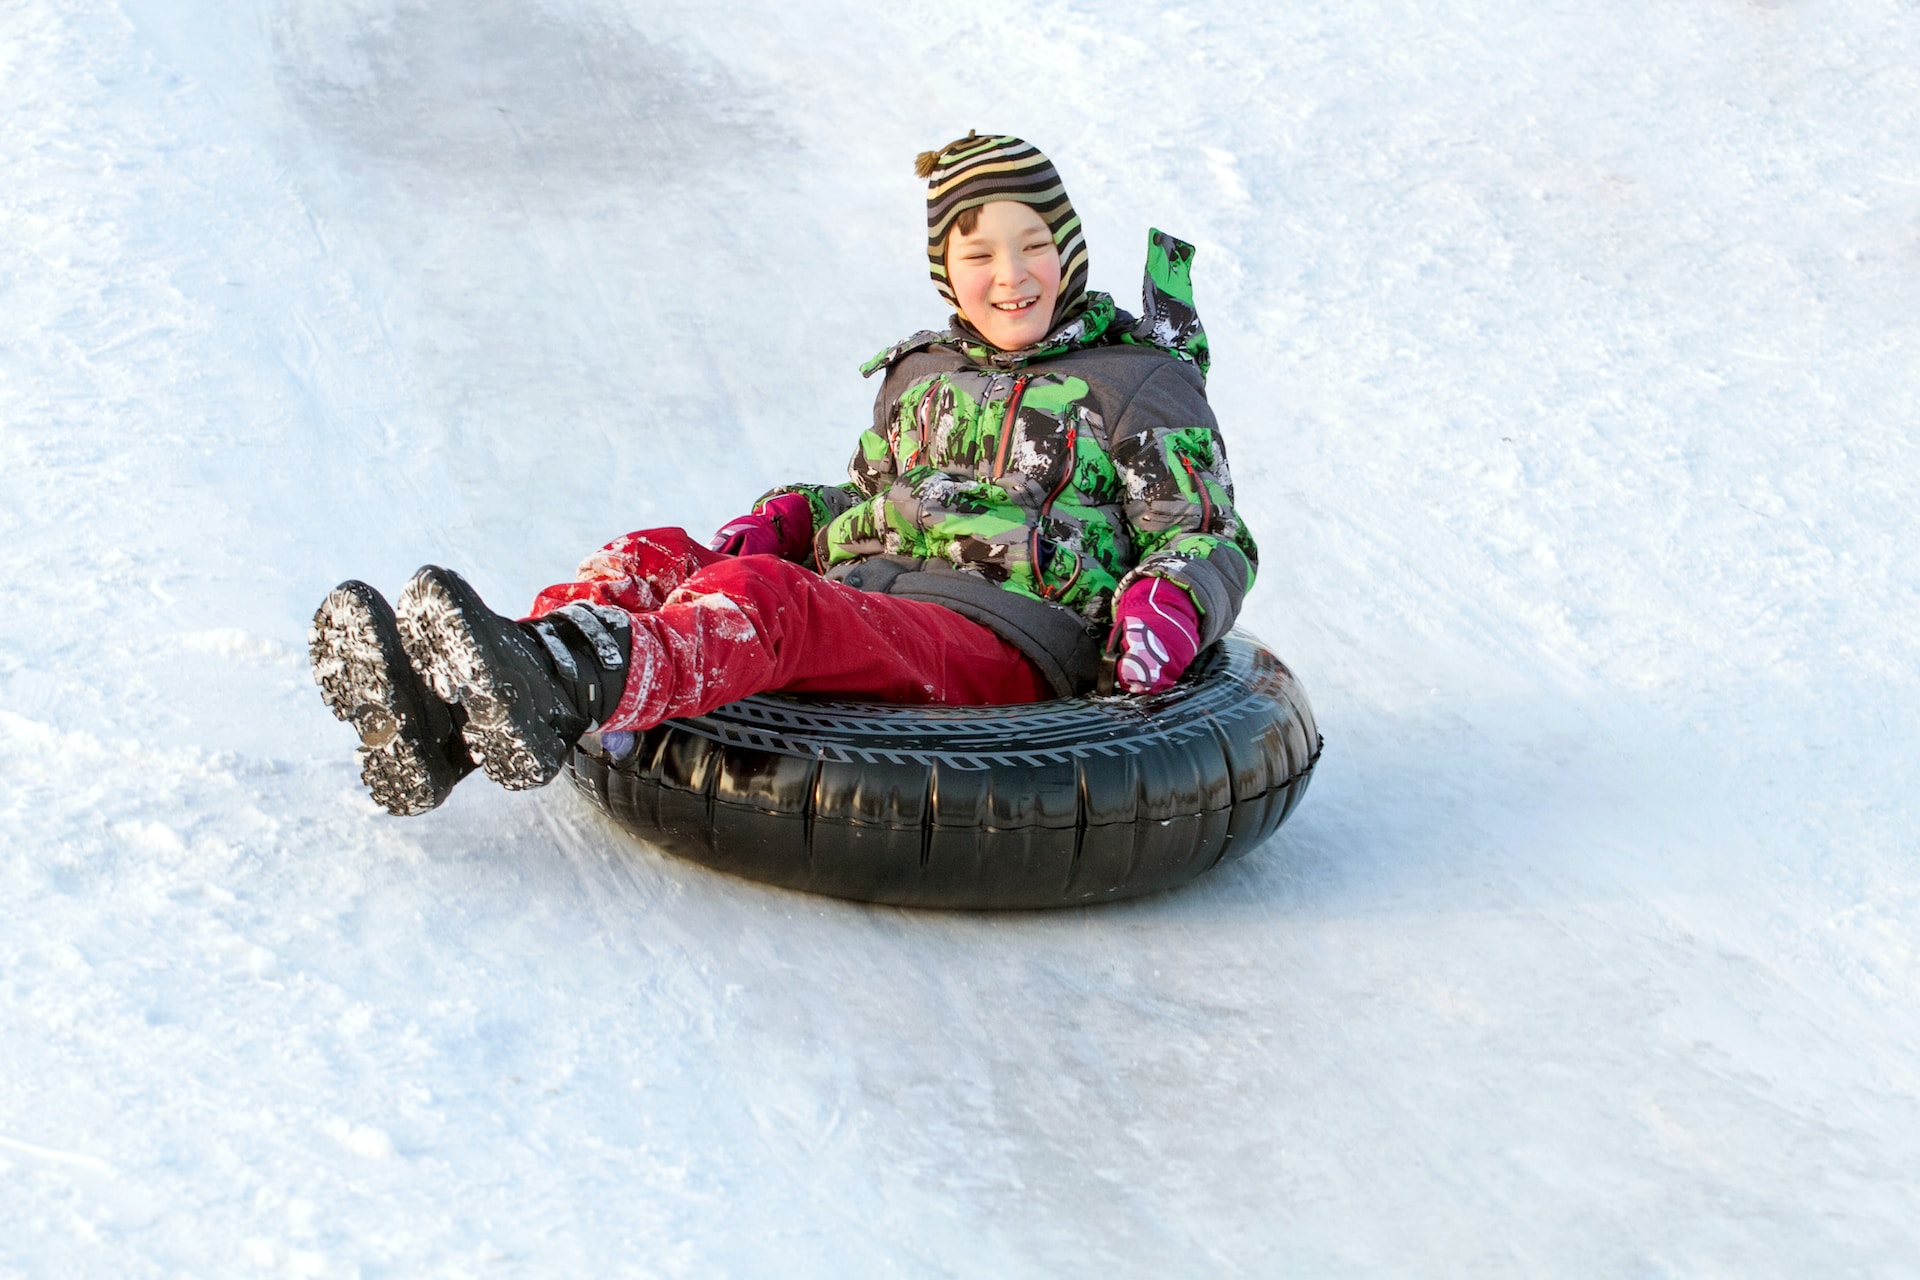 Go sledding in Bend, Oregon on your next vacation